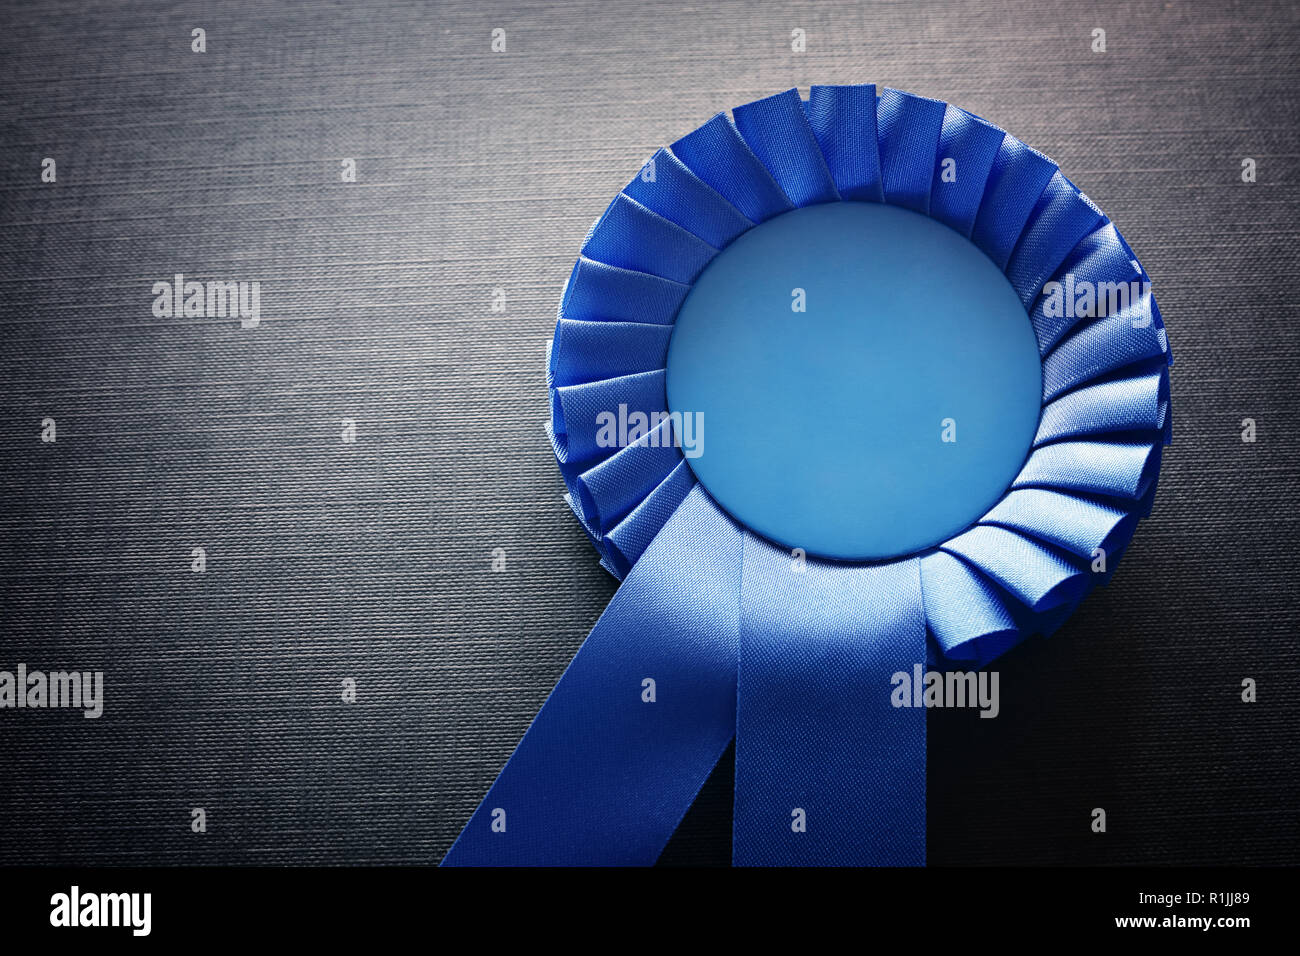 Blue award rosette with ribbons and copy space on black background Stock Photo